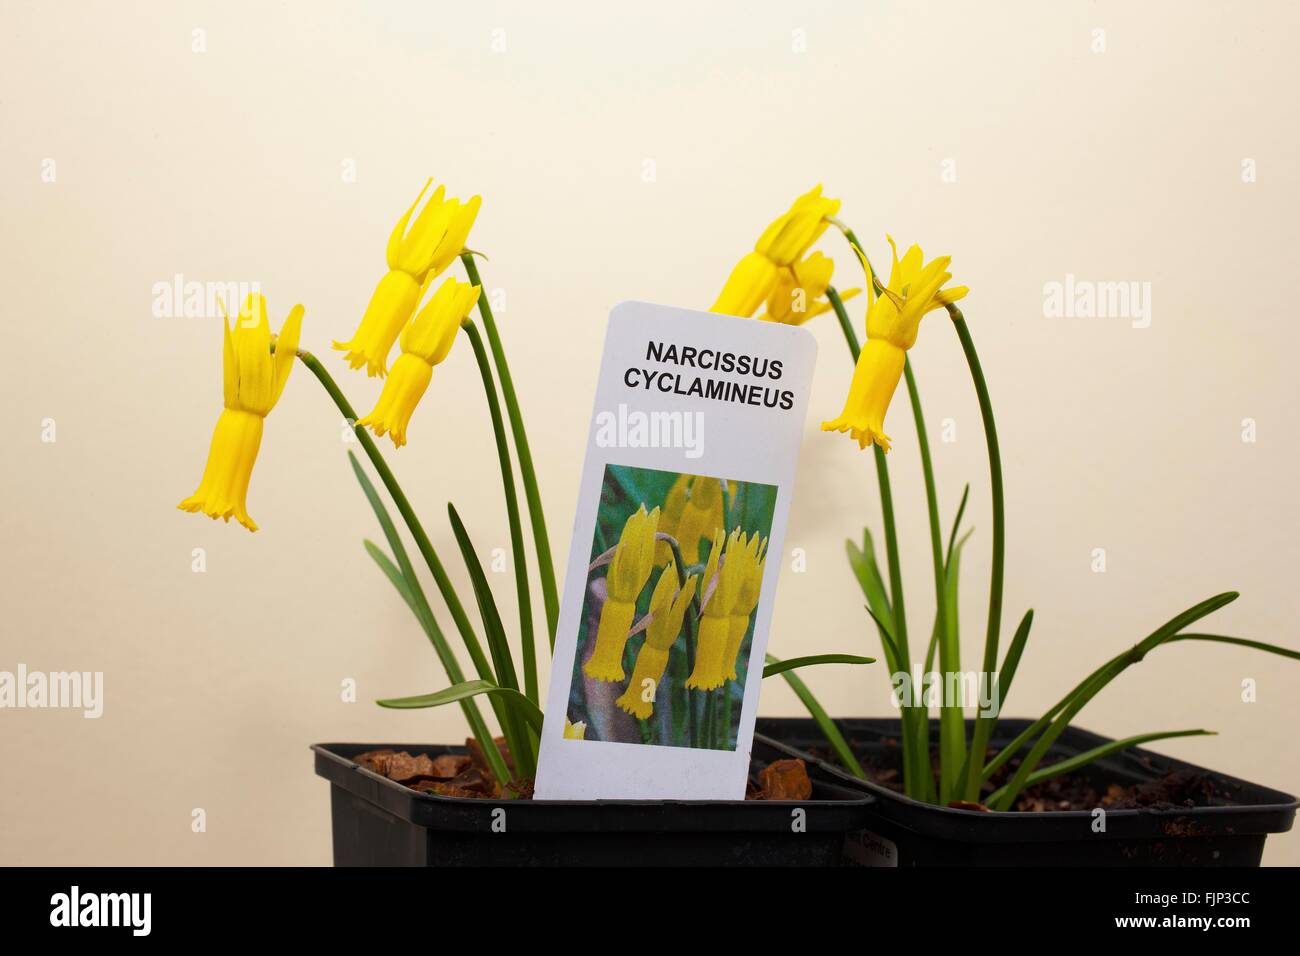 Narcissus cyclamineus (cyclamen-flowered daffodil) is a species of flowering plant in the family Amaryllidaceae, Stock Photo